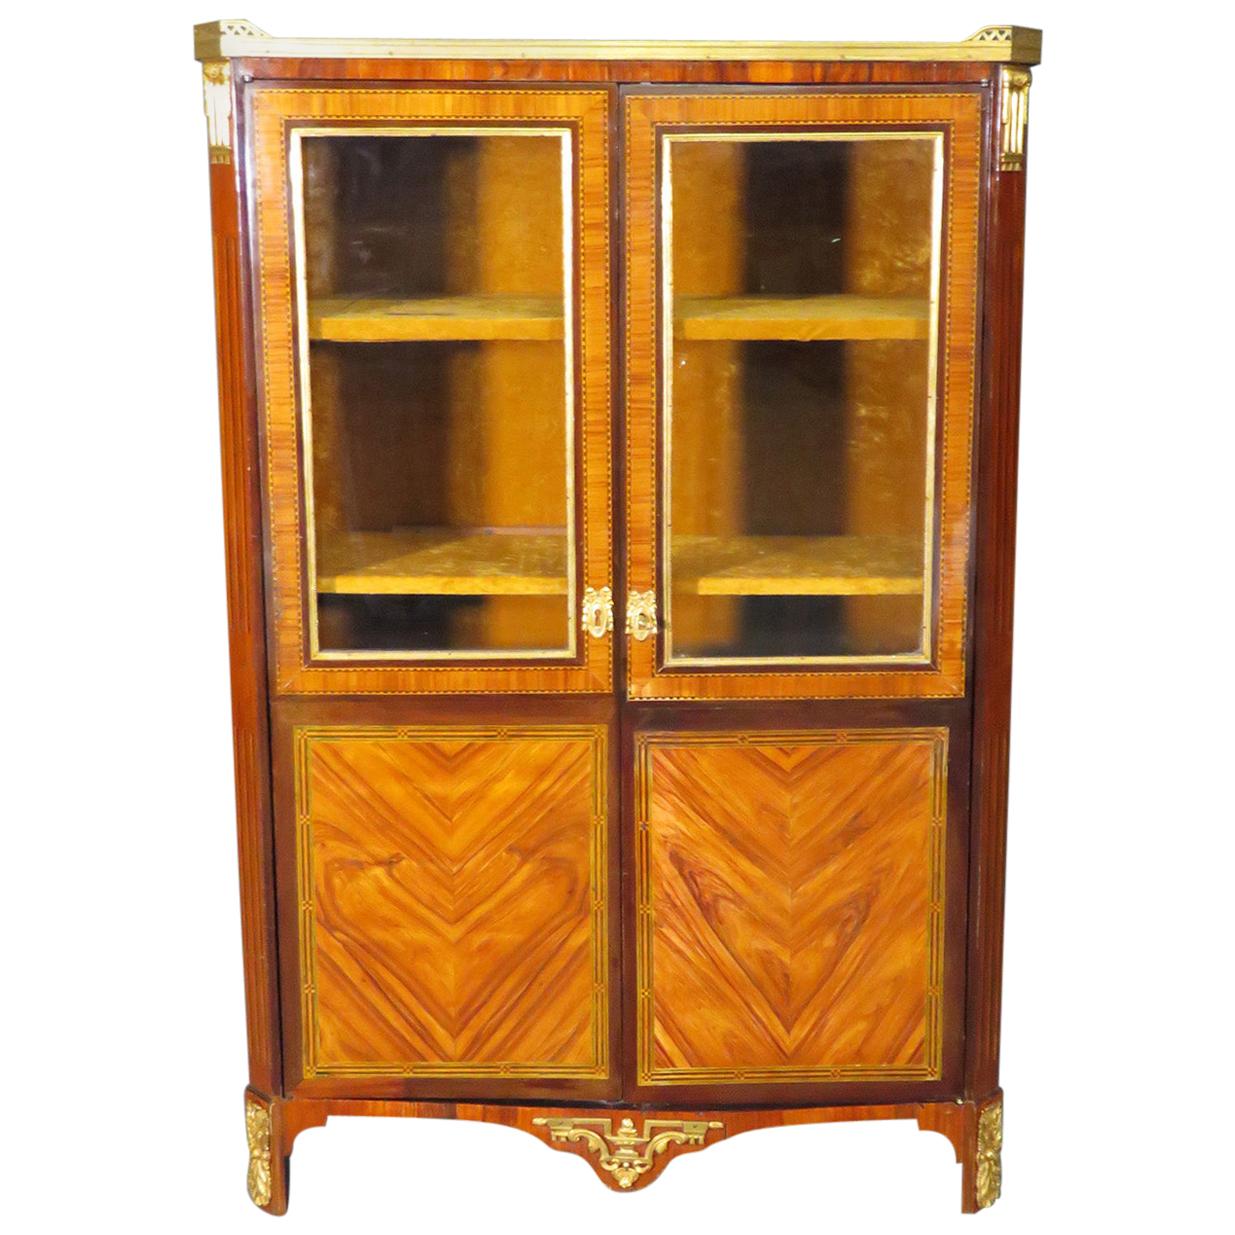 French Louis XV Dore' Bronze Mounted Marble Top Bookcase Biblioteque circa 1890s